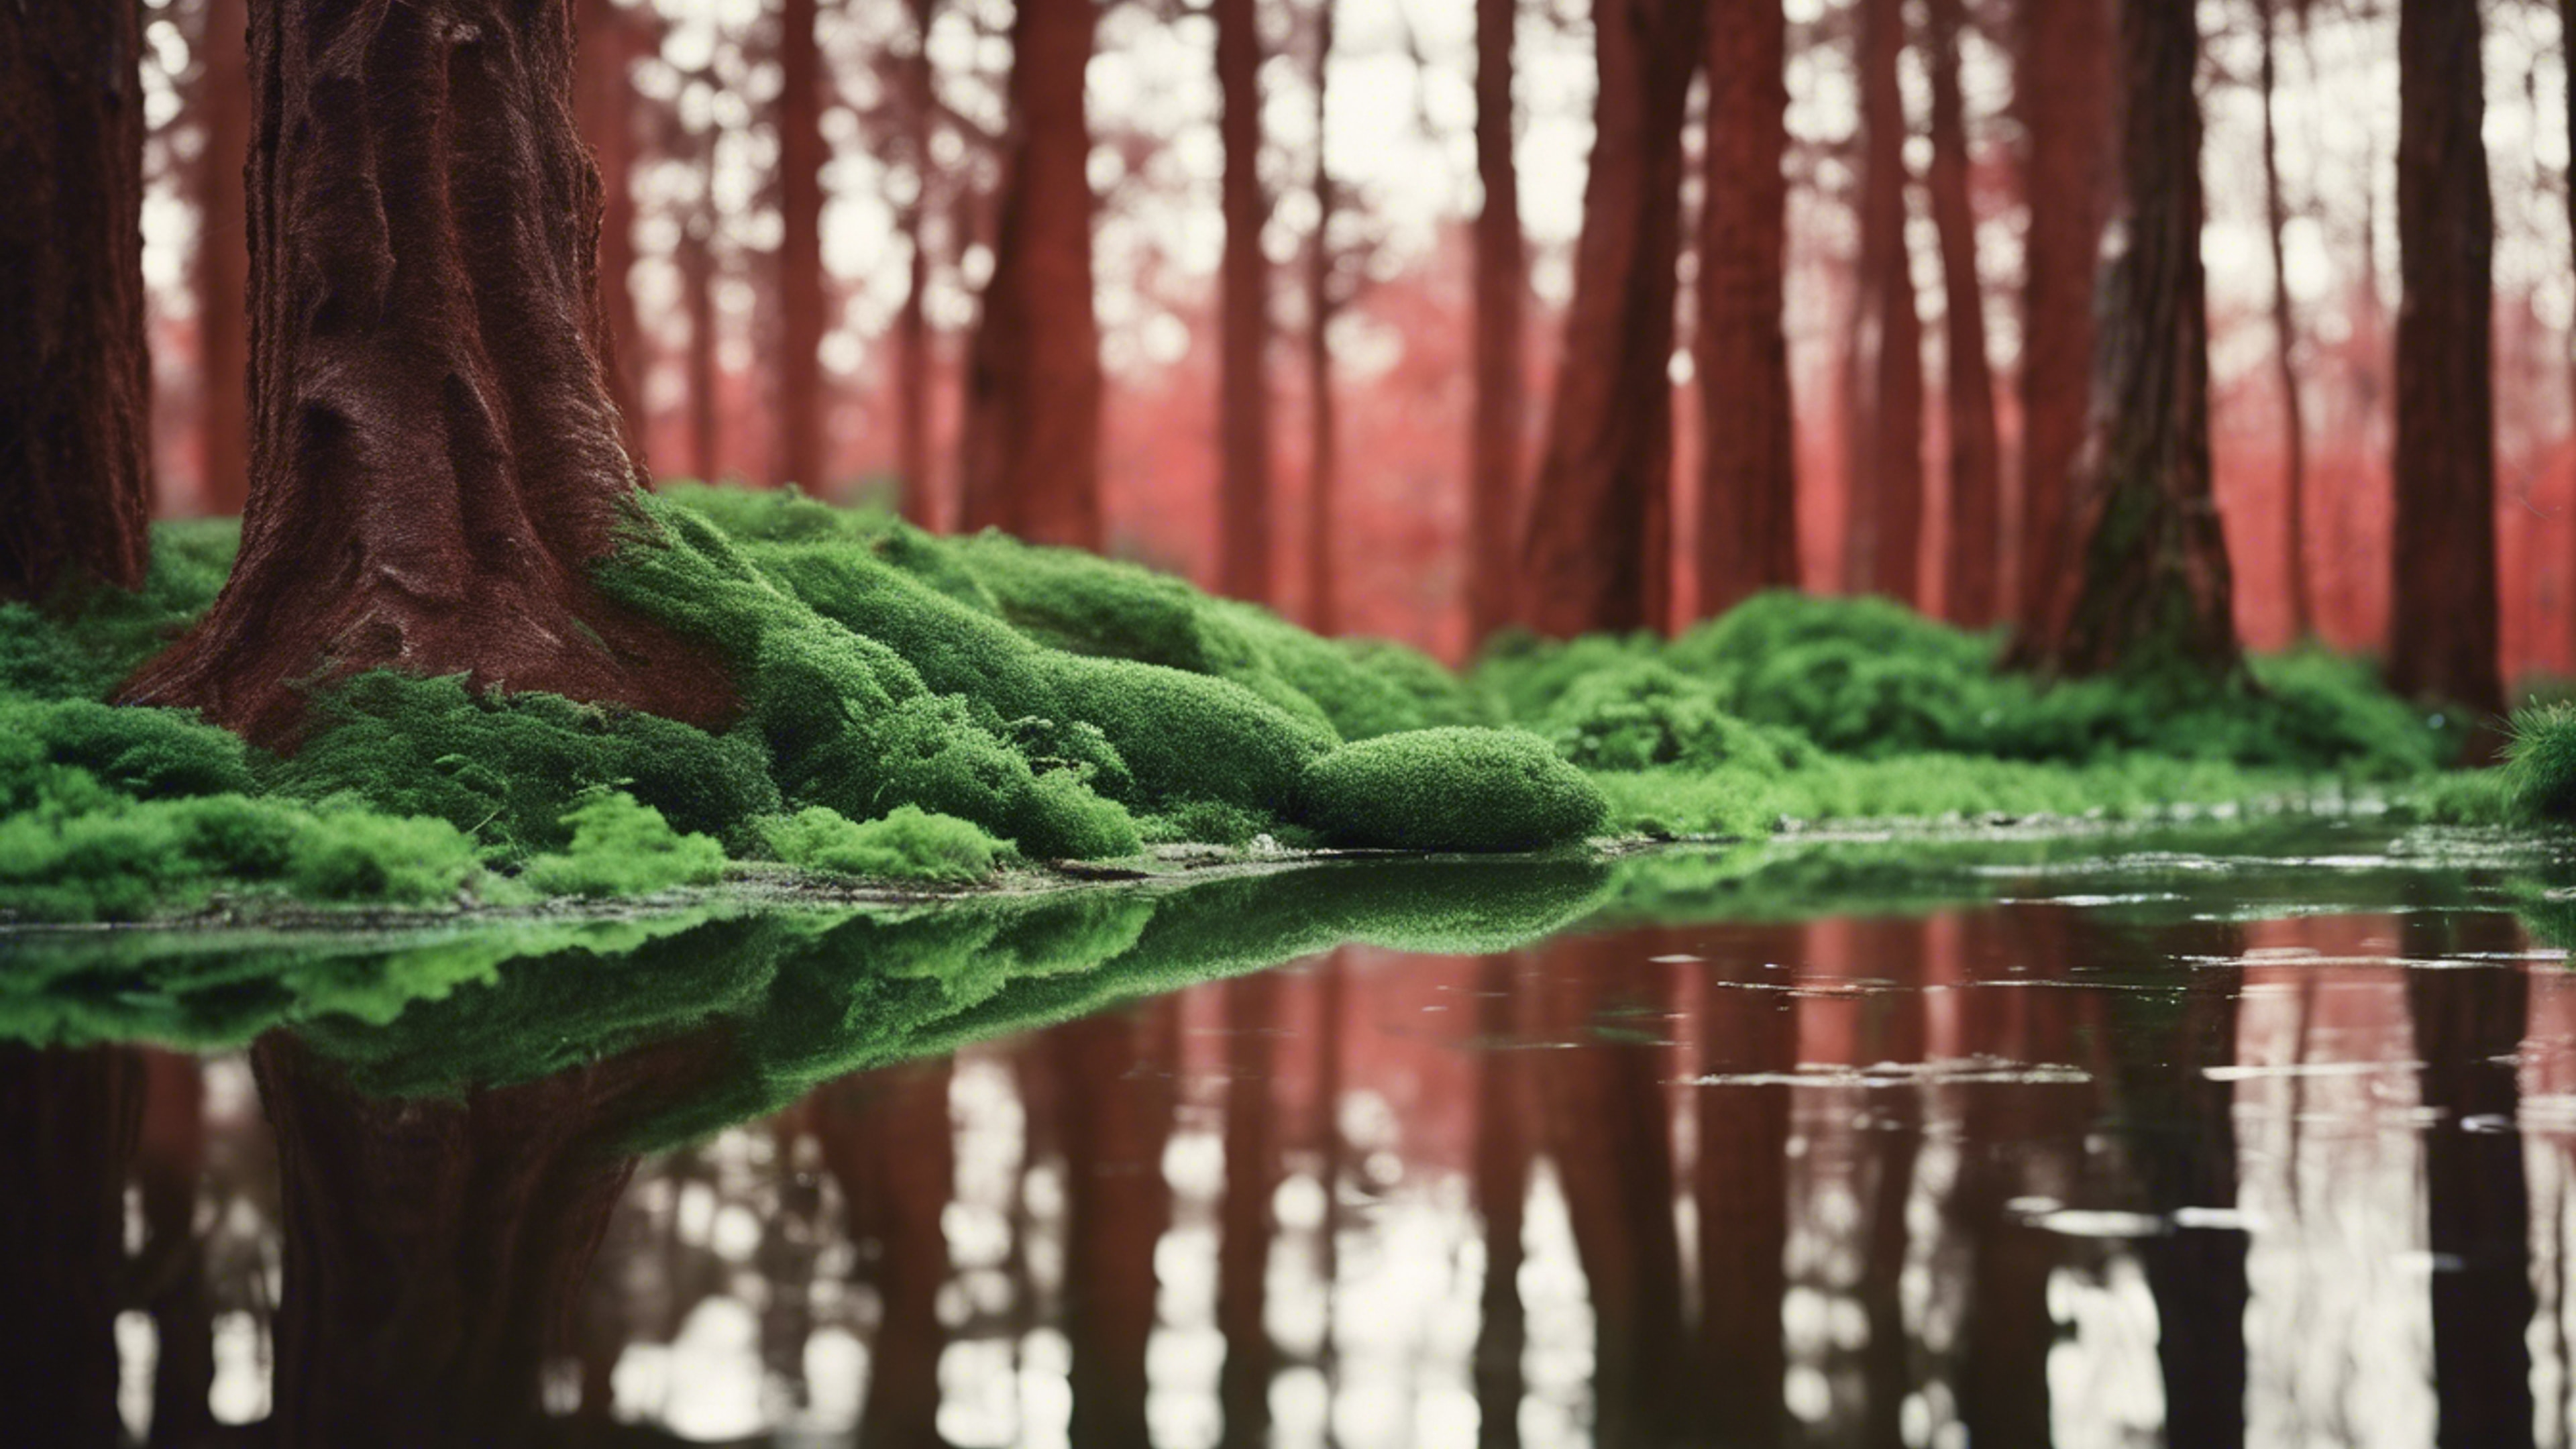 Lush, green forest reflections on a shiny, red leather surface. Tapeta[6f4e1618f75b40719461]